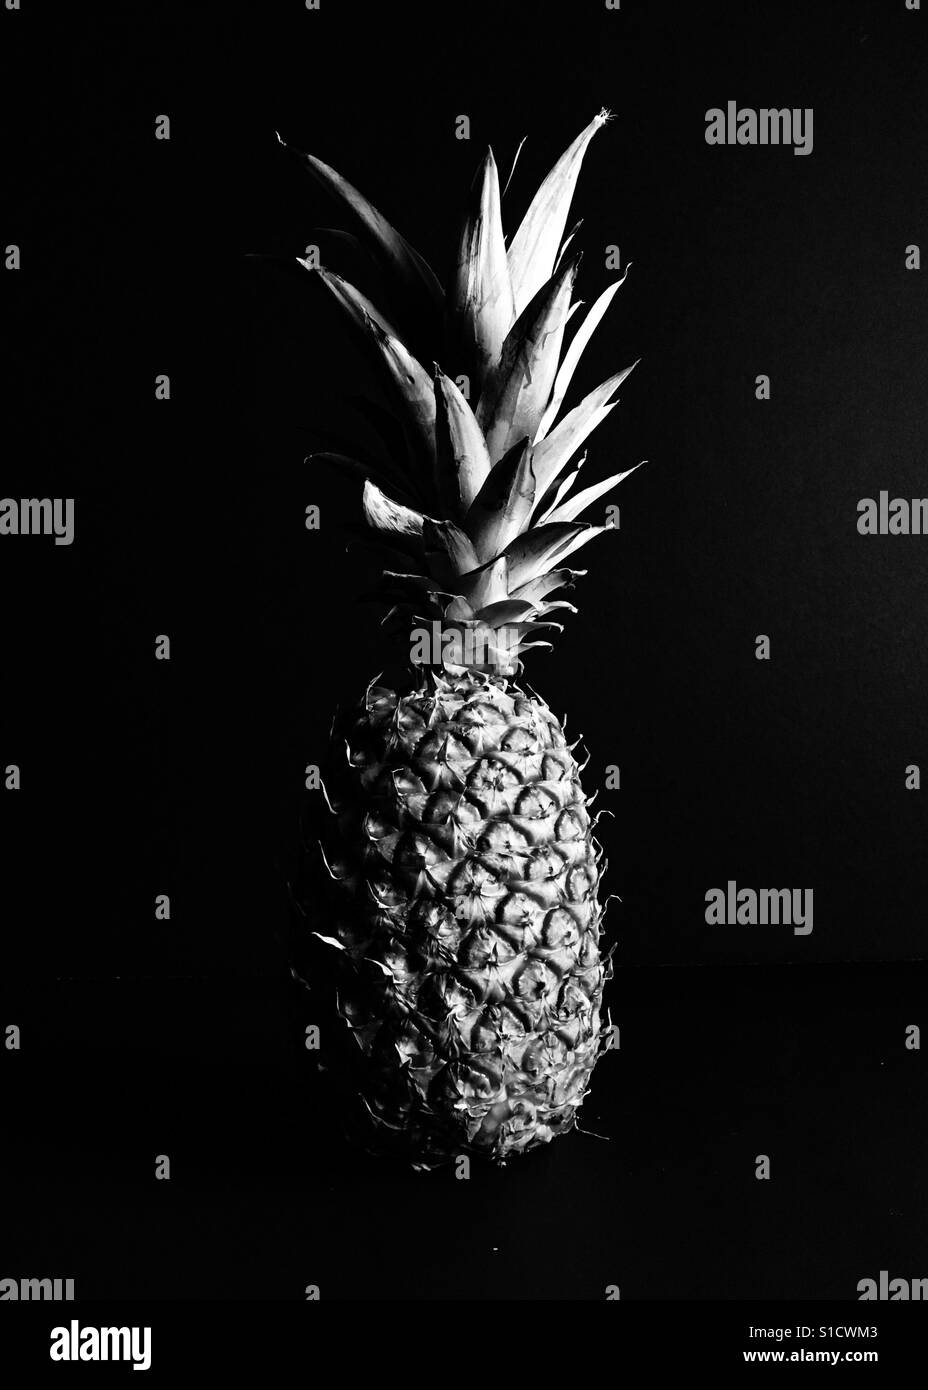 Pineapple on black backdrop. In black and white. Portrait. Room for copy. Stock Photo